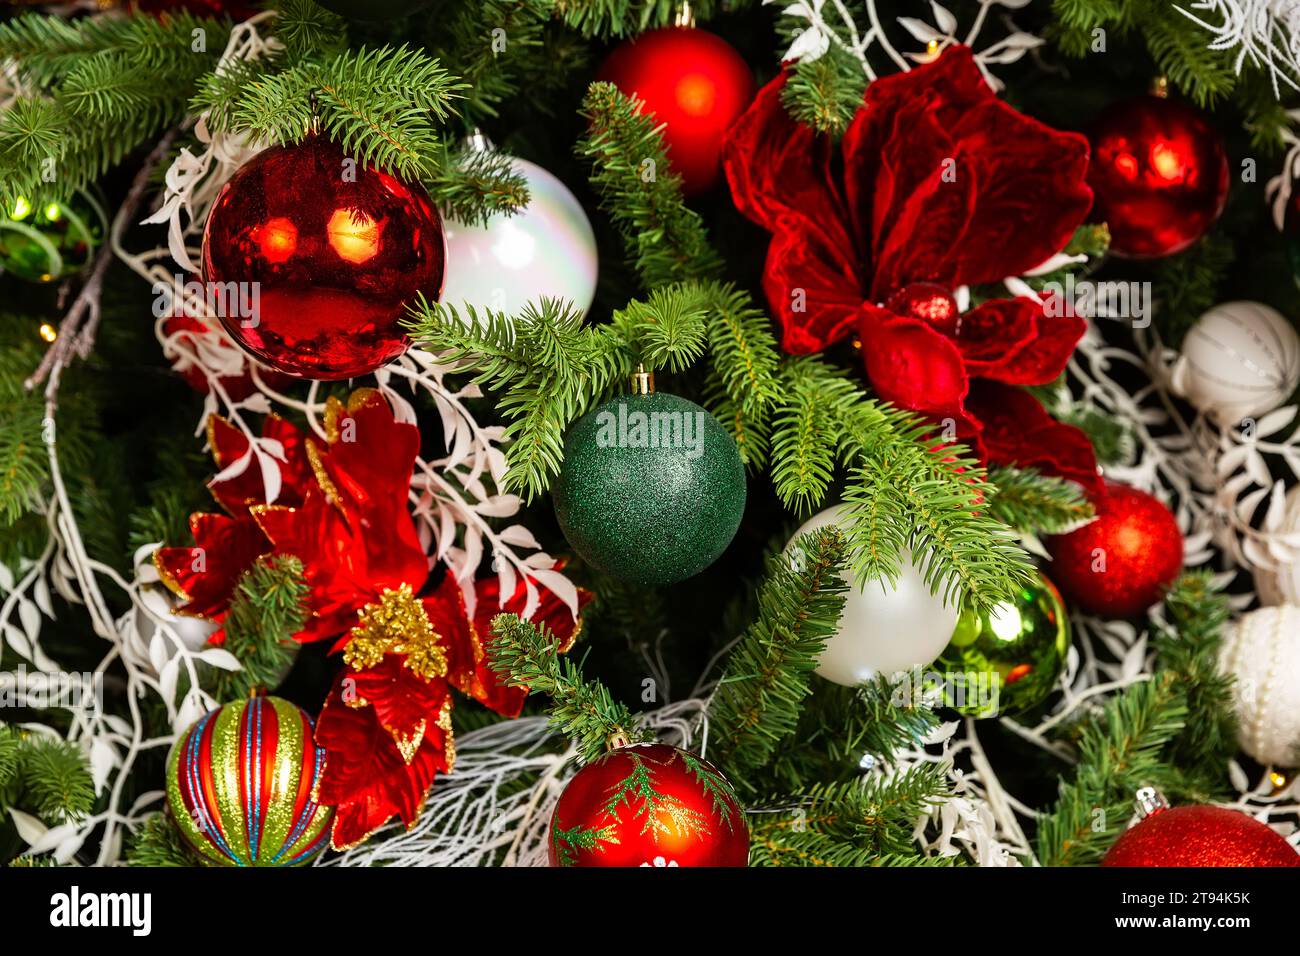 Close up of balls on Christmas tree. Christmas holiday decorations with balls, lights and garland on Christmas tree background. Holiday home decoratio Stock Photo